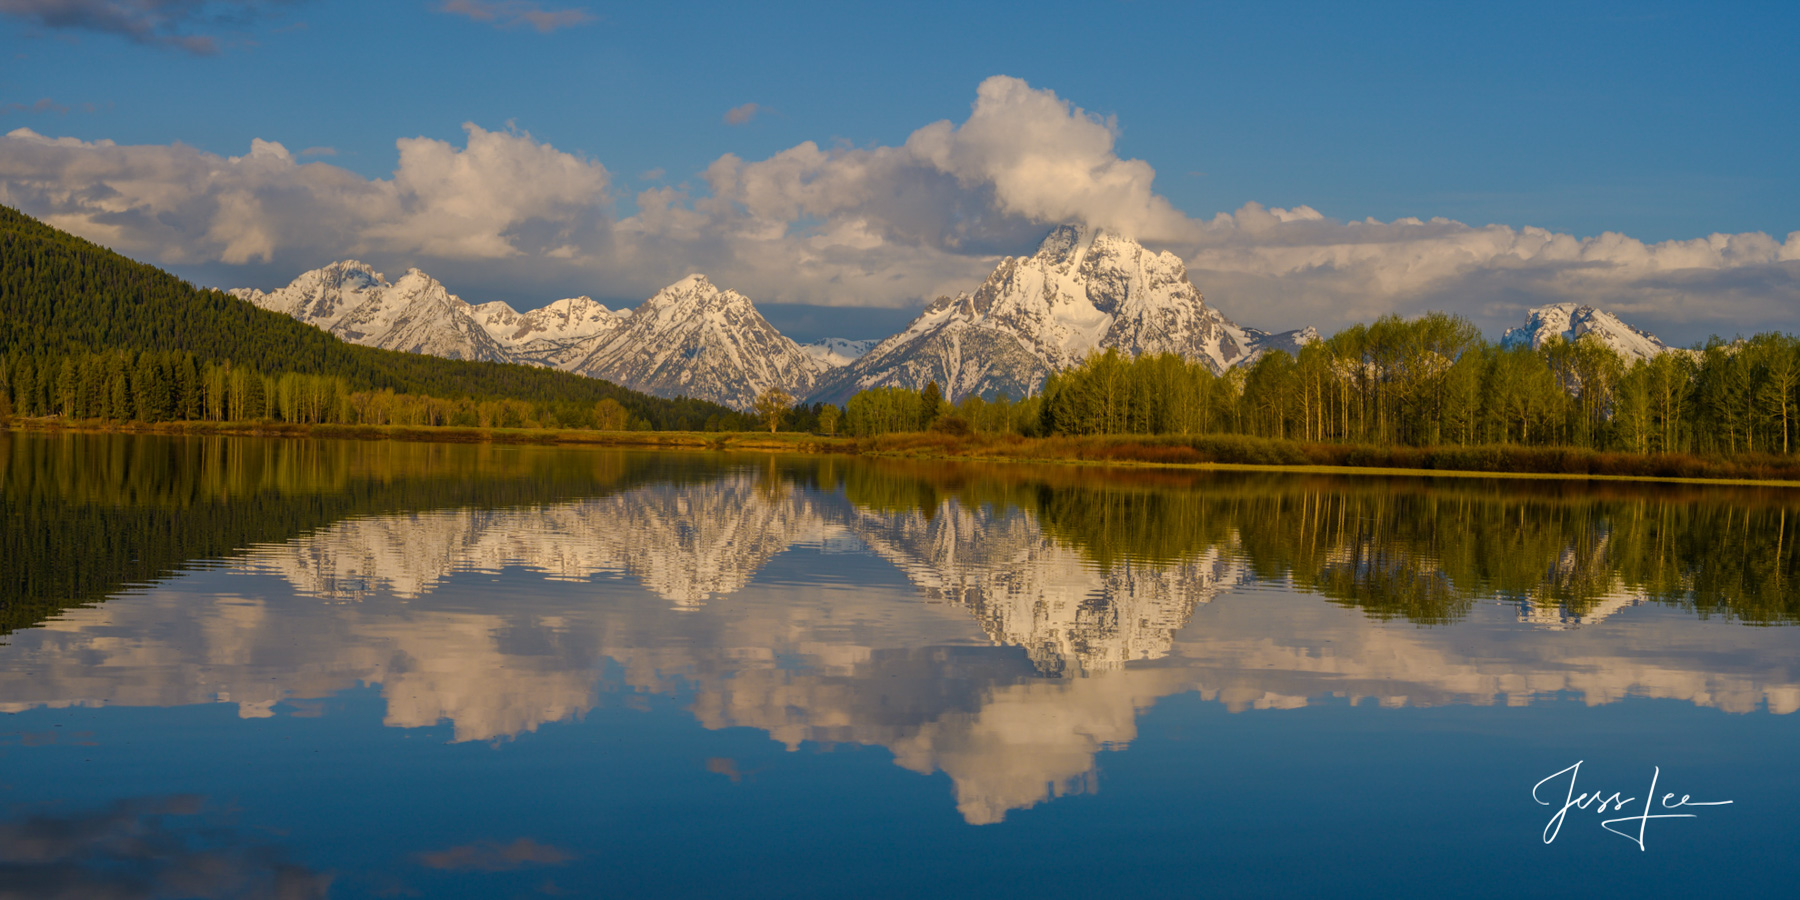 Limited Edition of 50 Exclusive high-resolution Museum Quality Fine Art Prints of Panorama Photography prints of the Teton Range...